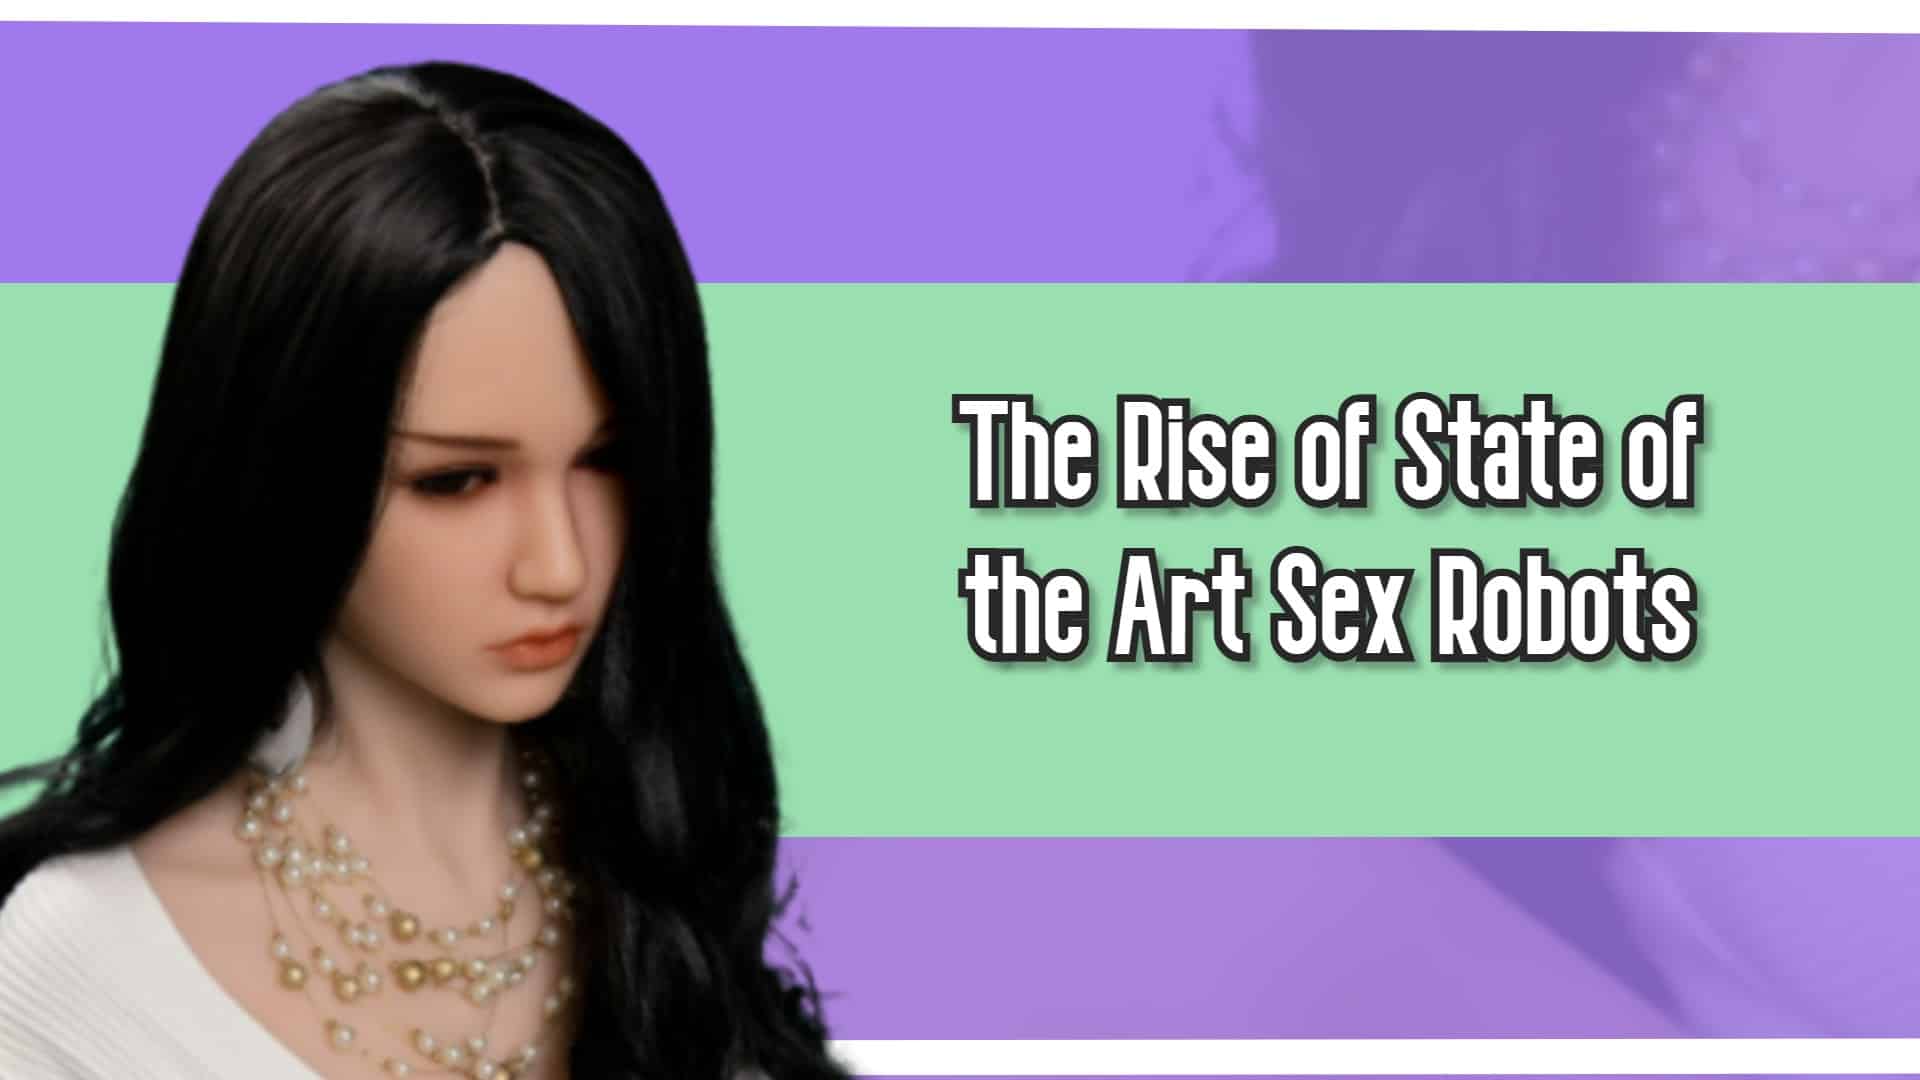 The Rise of State of the Art Sex Robots